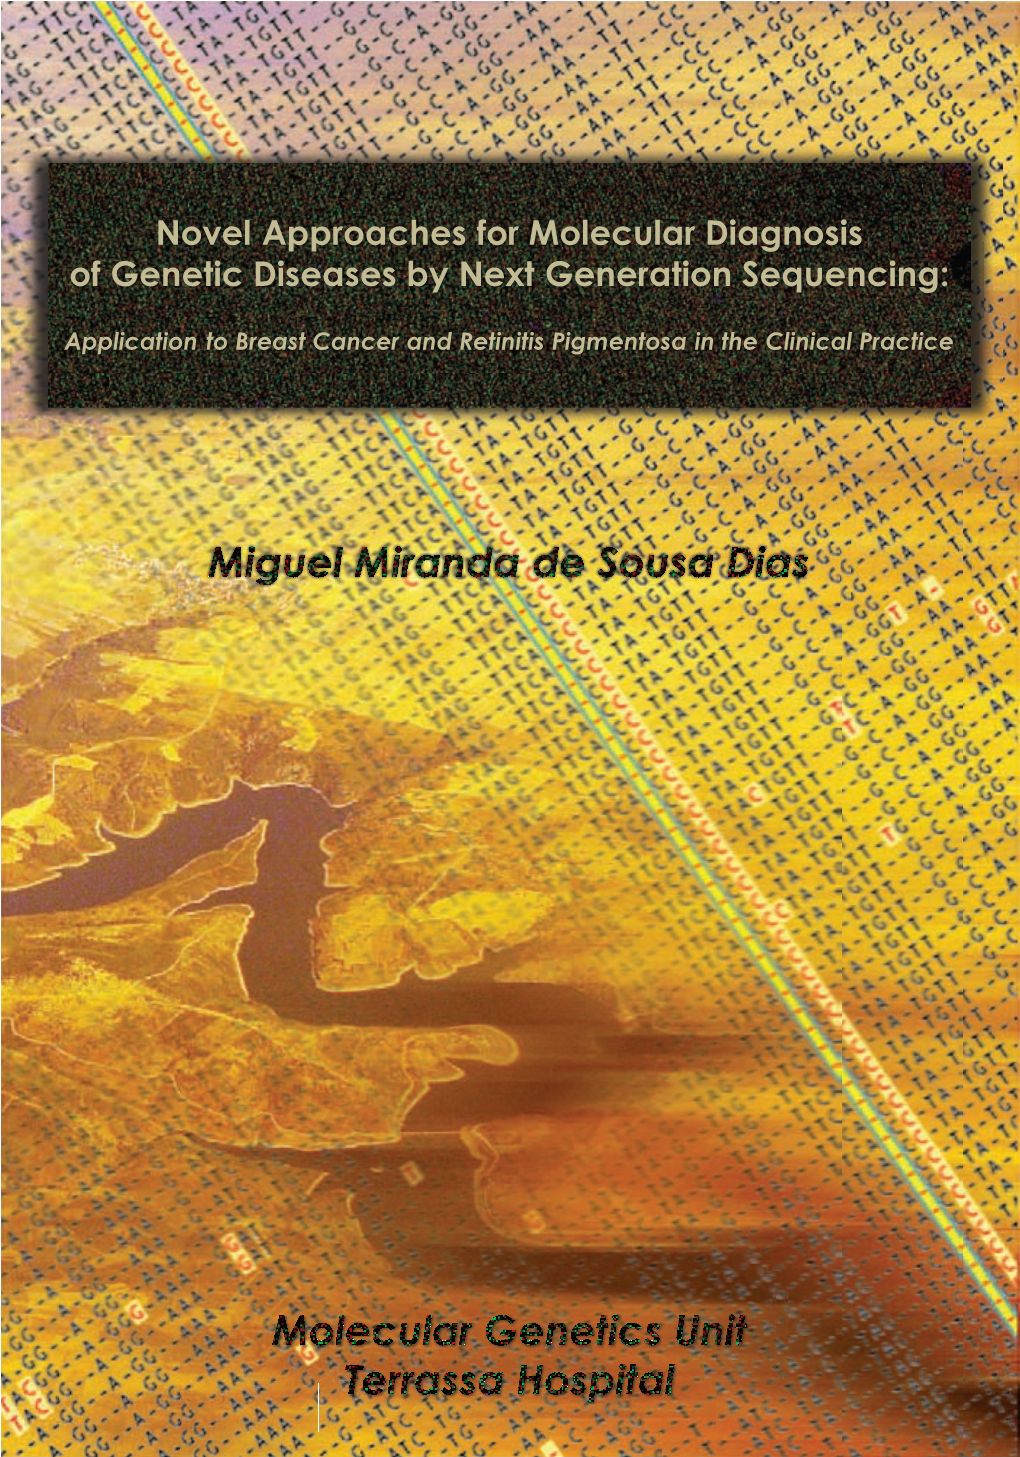 Novel Approaches for Molecular Diagnosis of Genetic Diseases by Next Generation Sequencing